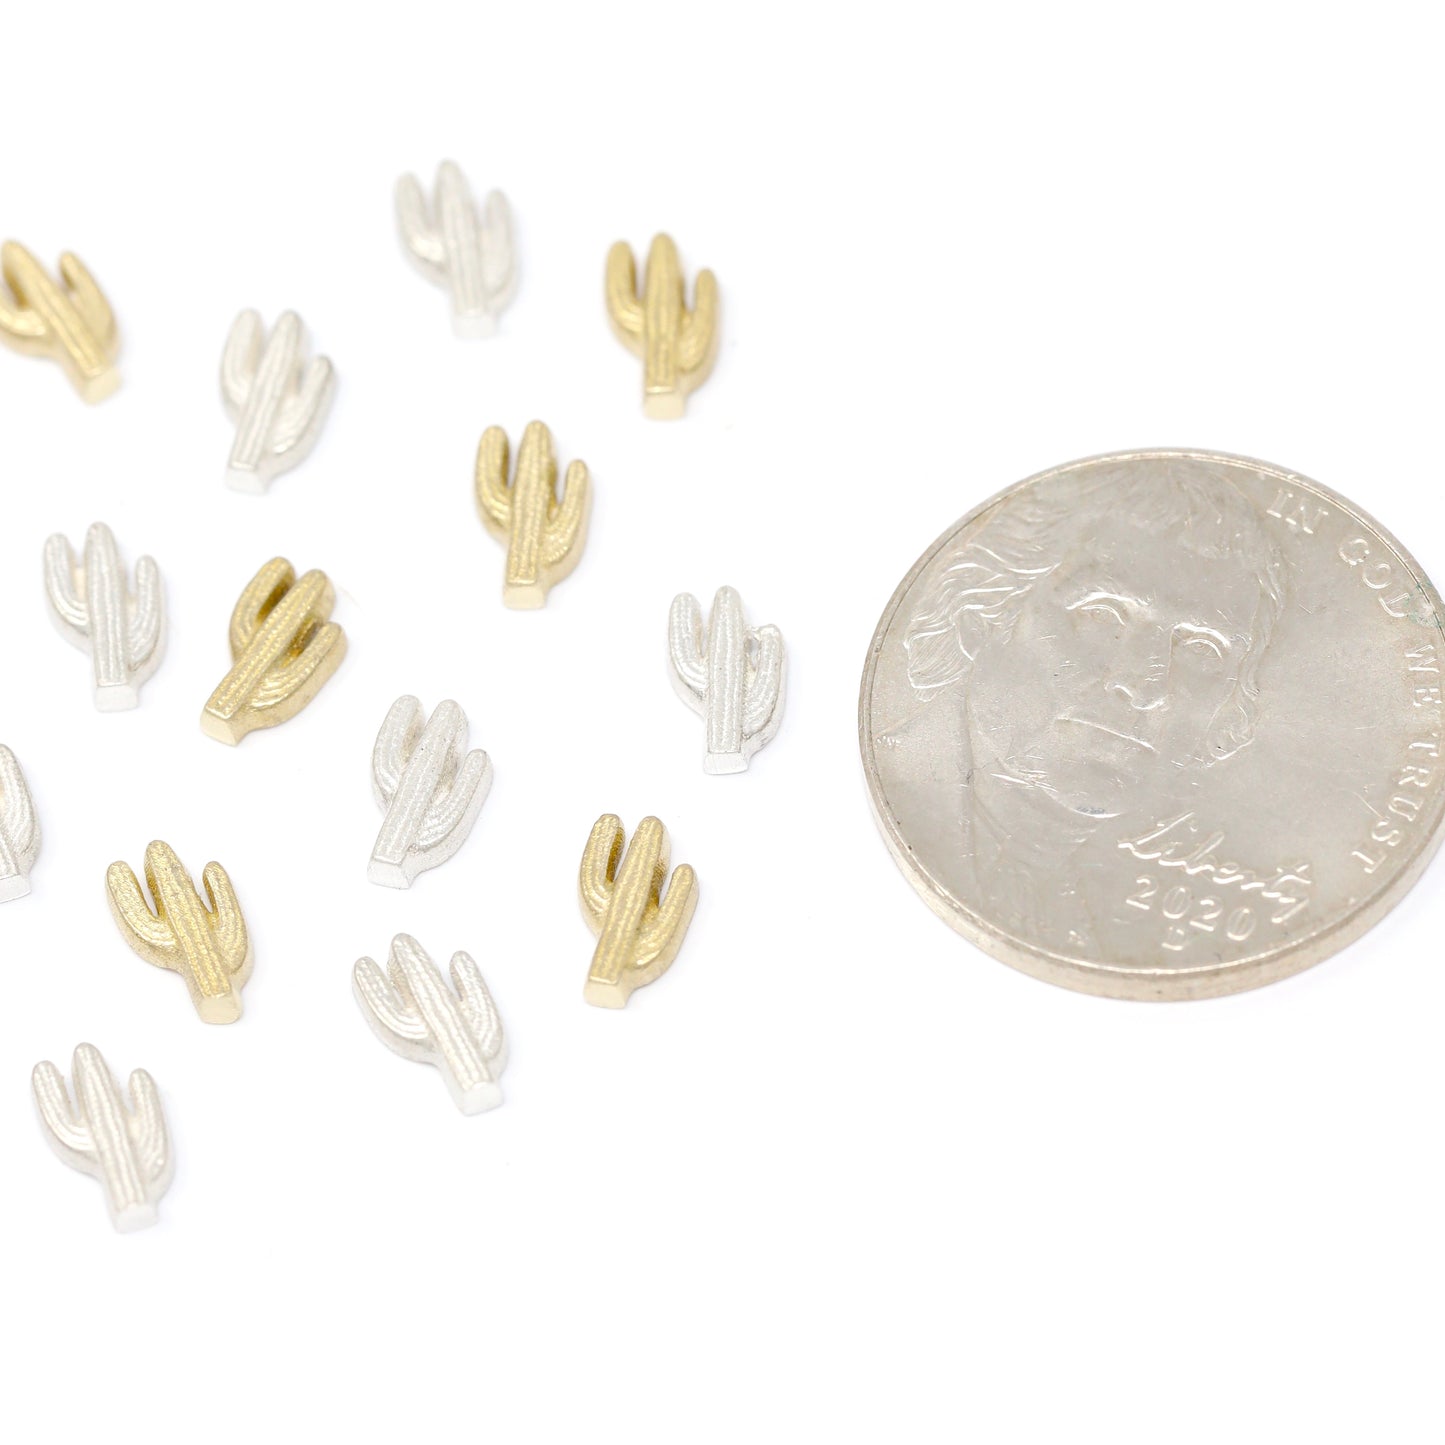 Saguaro Cactus Accent Charm Embellishments for Soldering or Jewelry Making